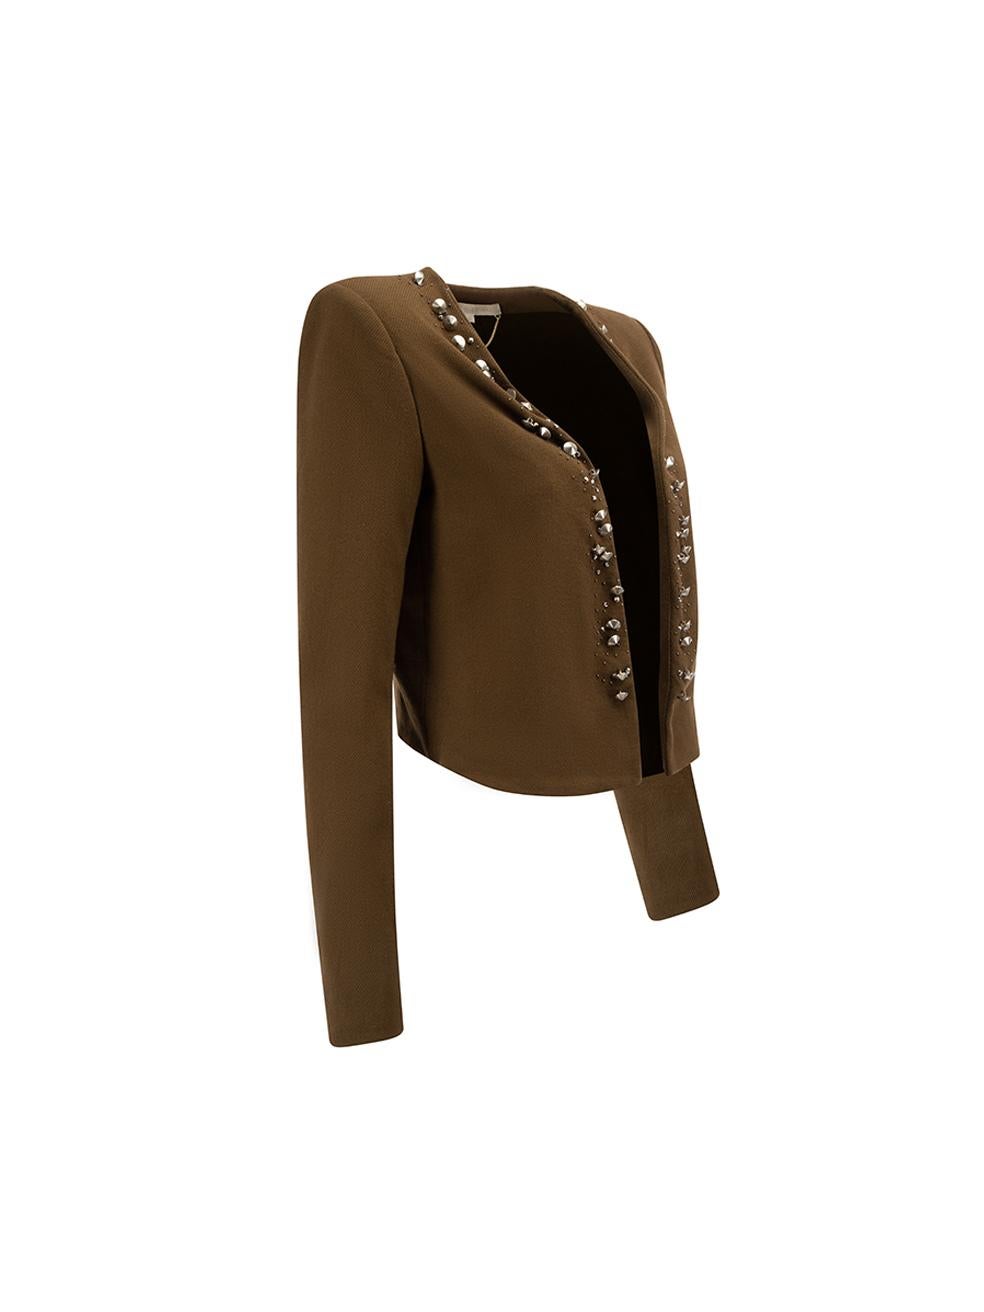 CONDITION is Very good. Minimal wear to jacket is evident. Minimal wear to embellishment with wear to spike studs on this used Vanessa Bruno designer resale item.



Details


Brown

Cotton

Cropped jacket

Open front

Studs and gemstone